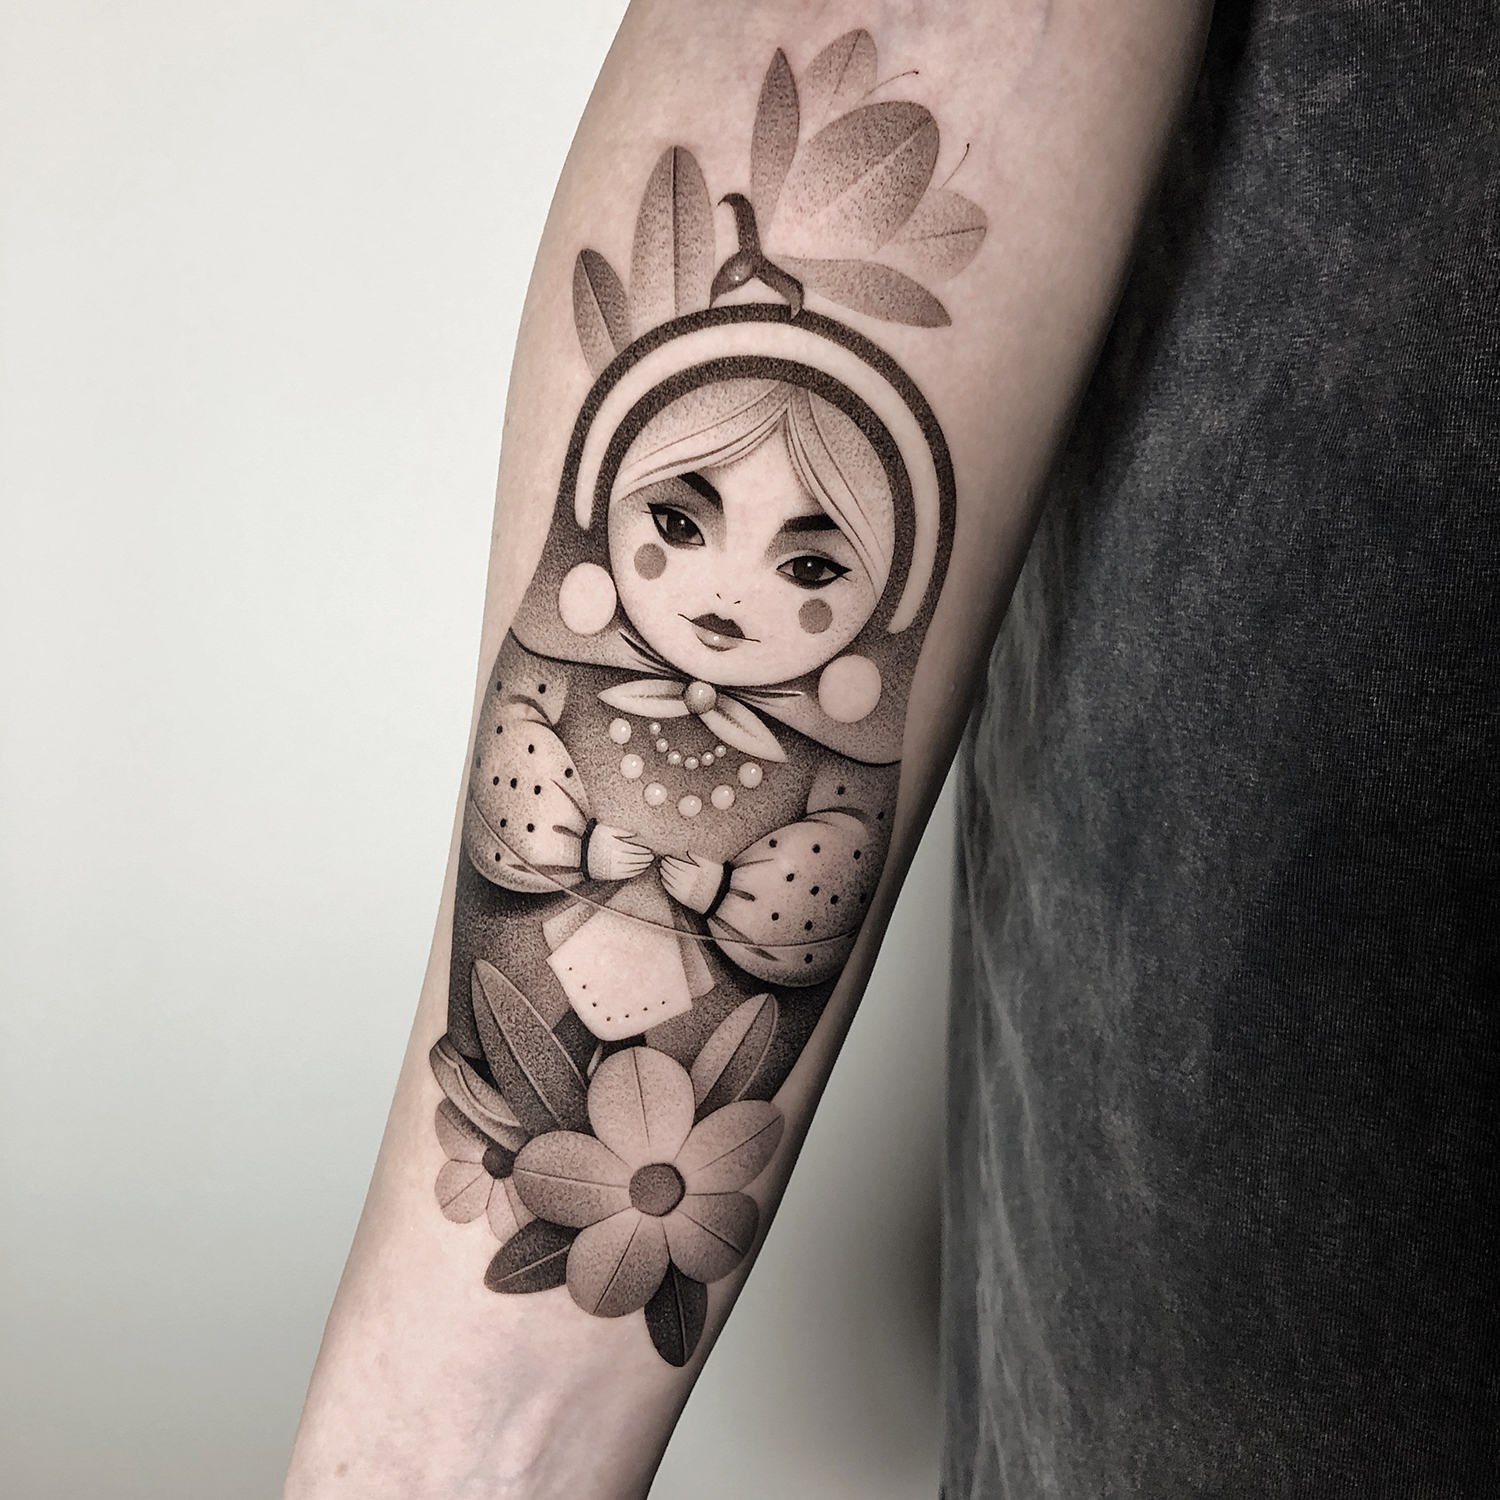 The detailed Russian nesting doll is shown on the client s arm, matryoshka